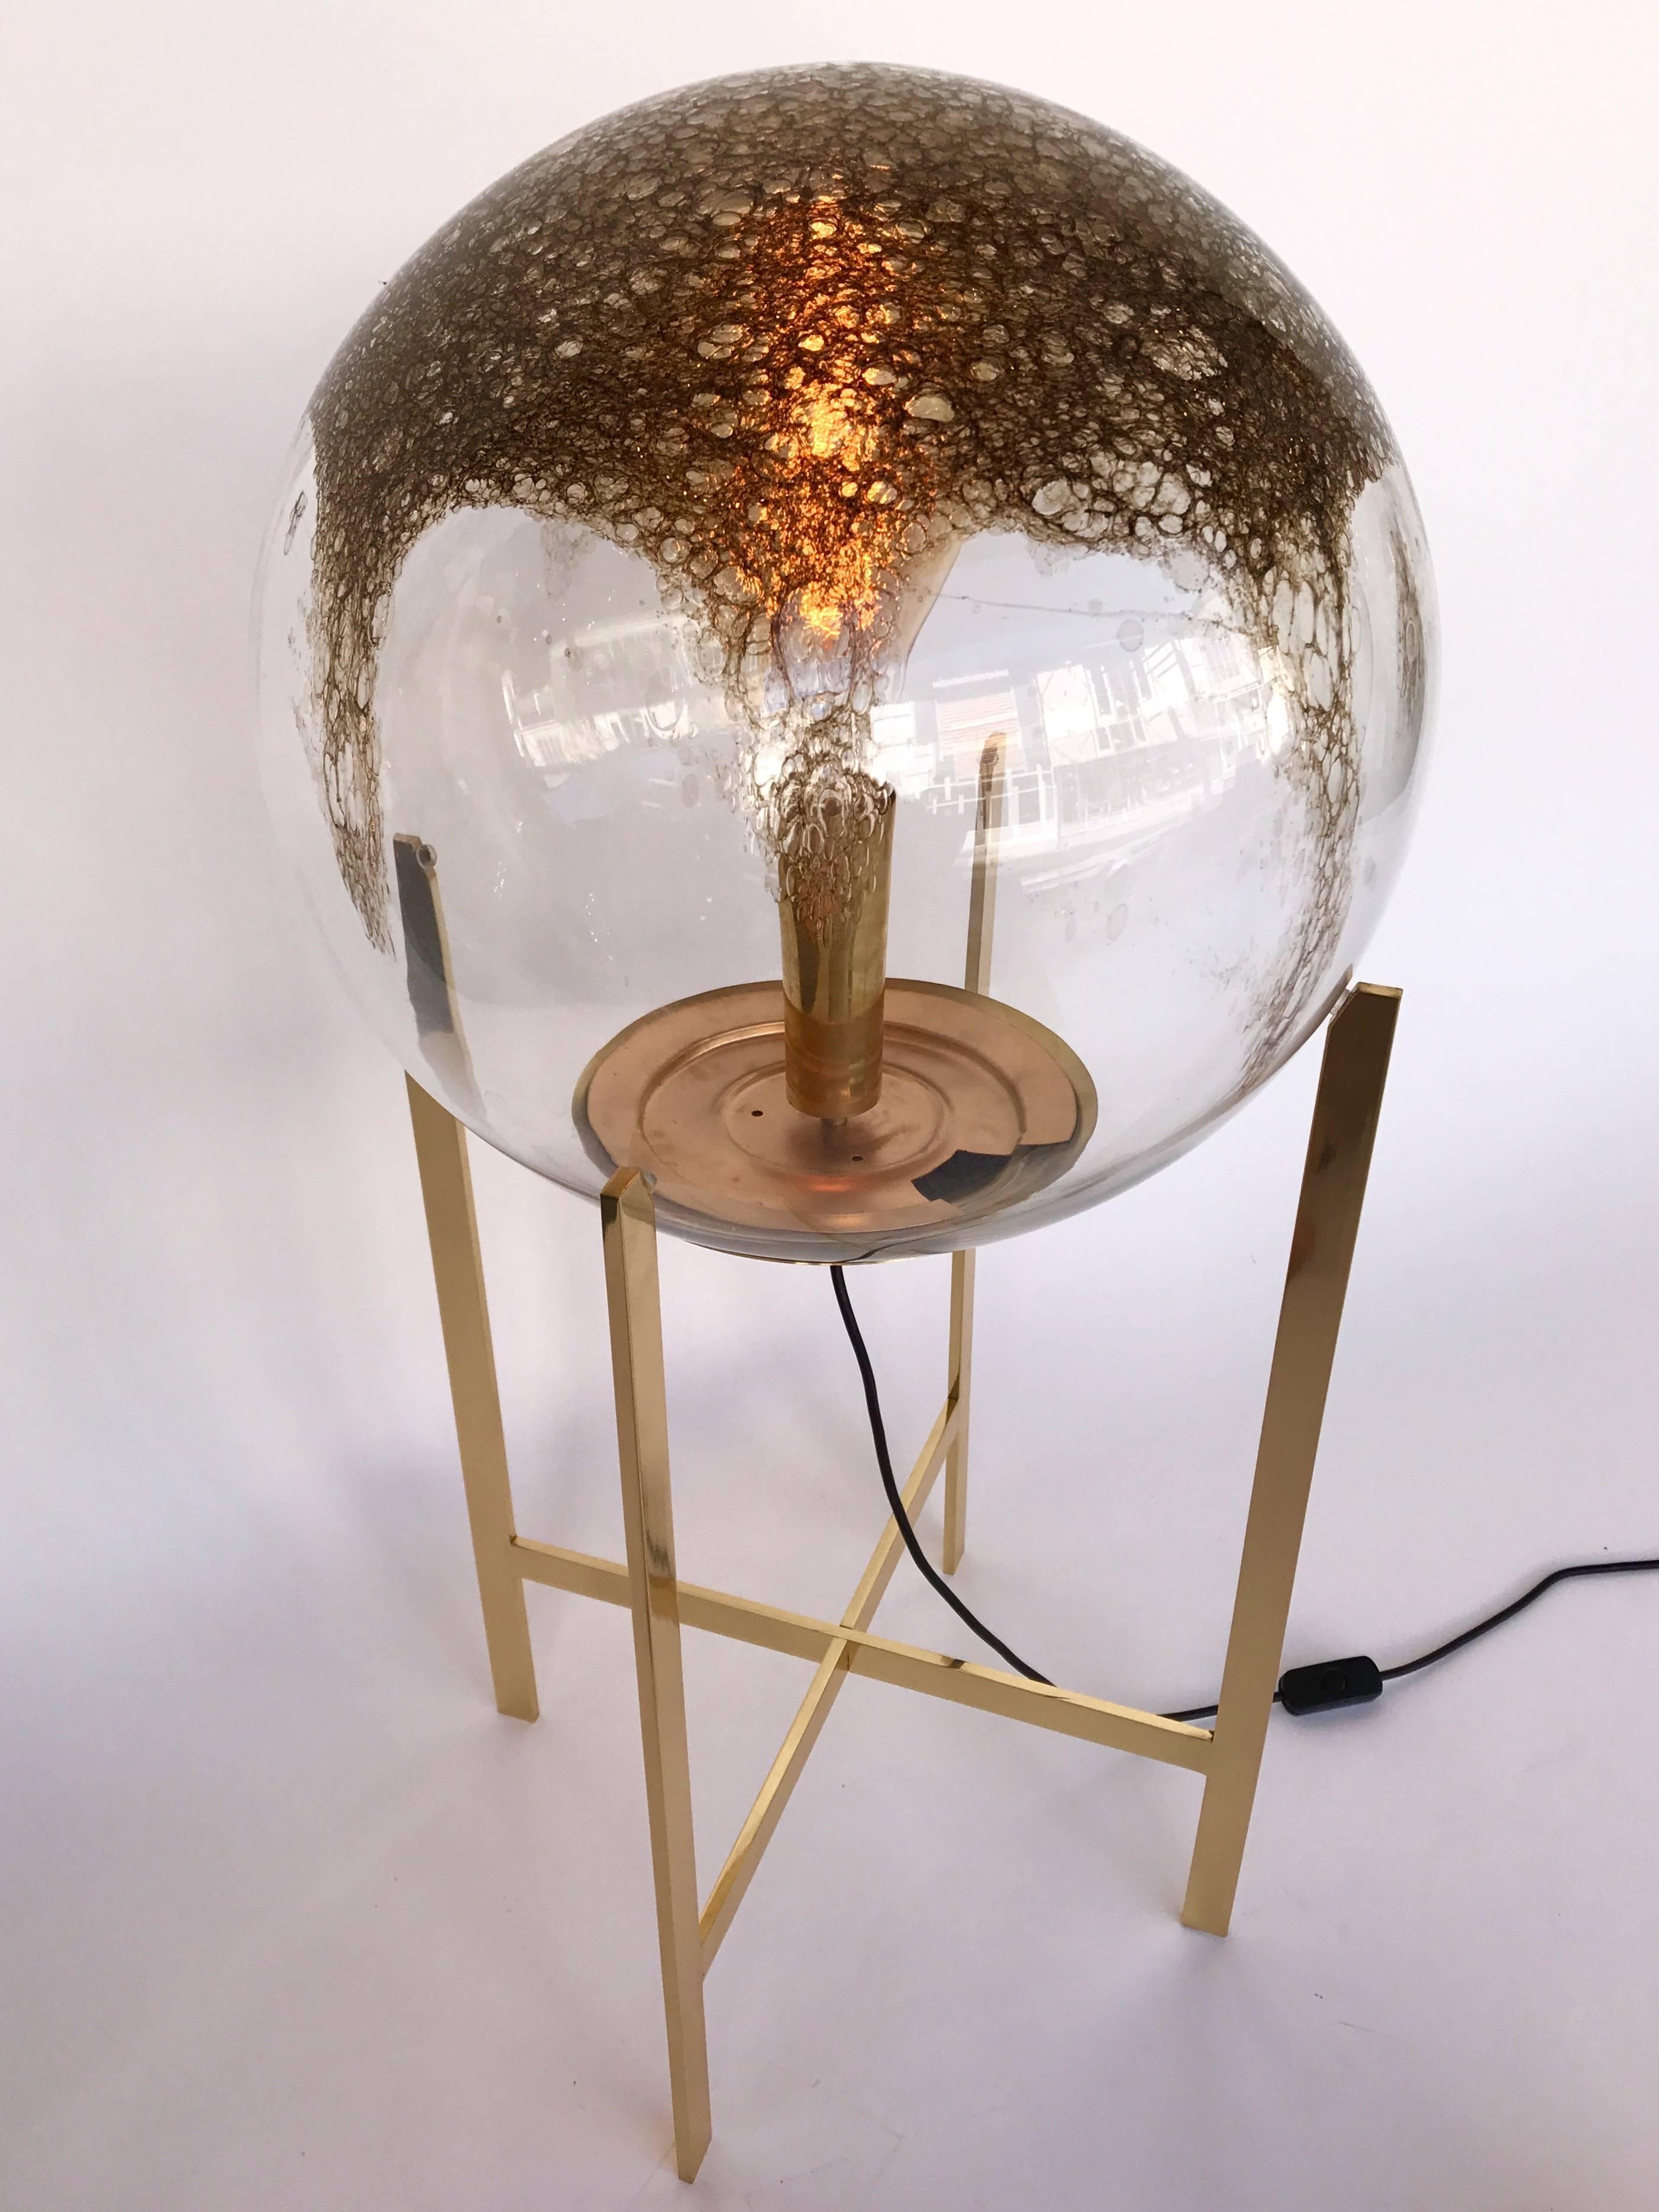 Impressive and decorative pair of floor lamps or huge table lamps by the editor La Murrina at Murano. Blown glass sphere with oxide of iron, which gives it this bronze color. Simple and elegant polish brass structure. Normal E26 bulbs can be use.